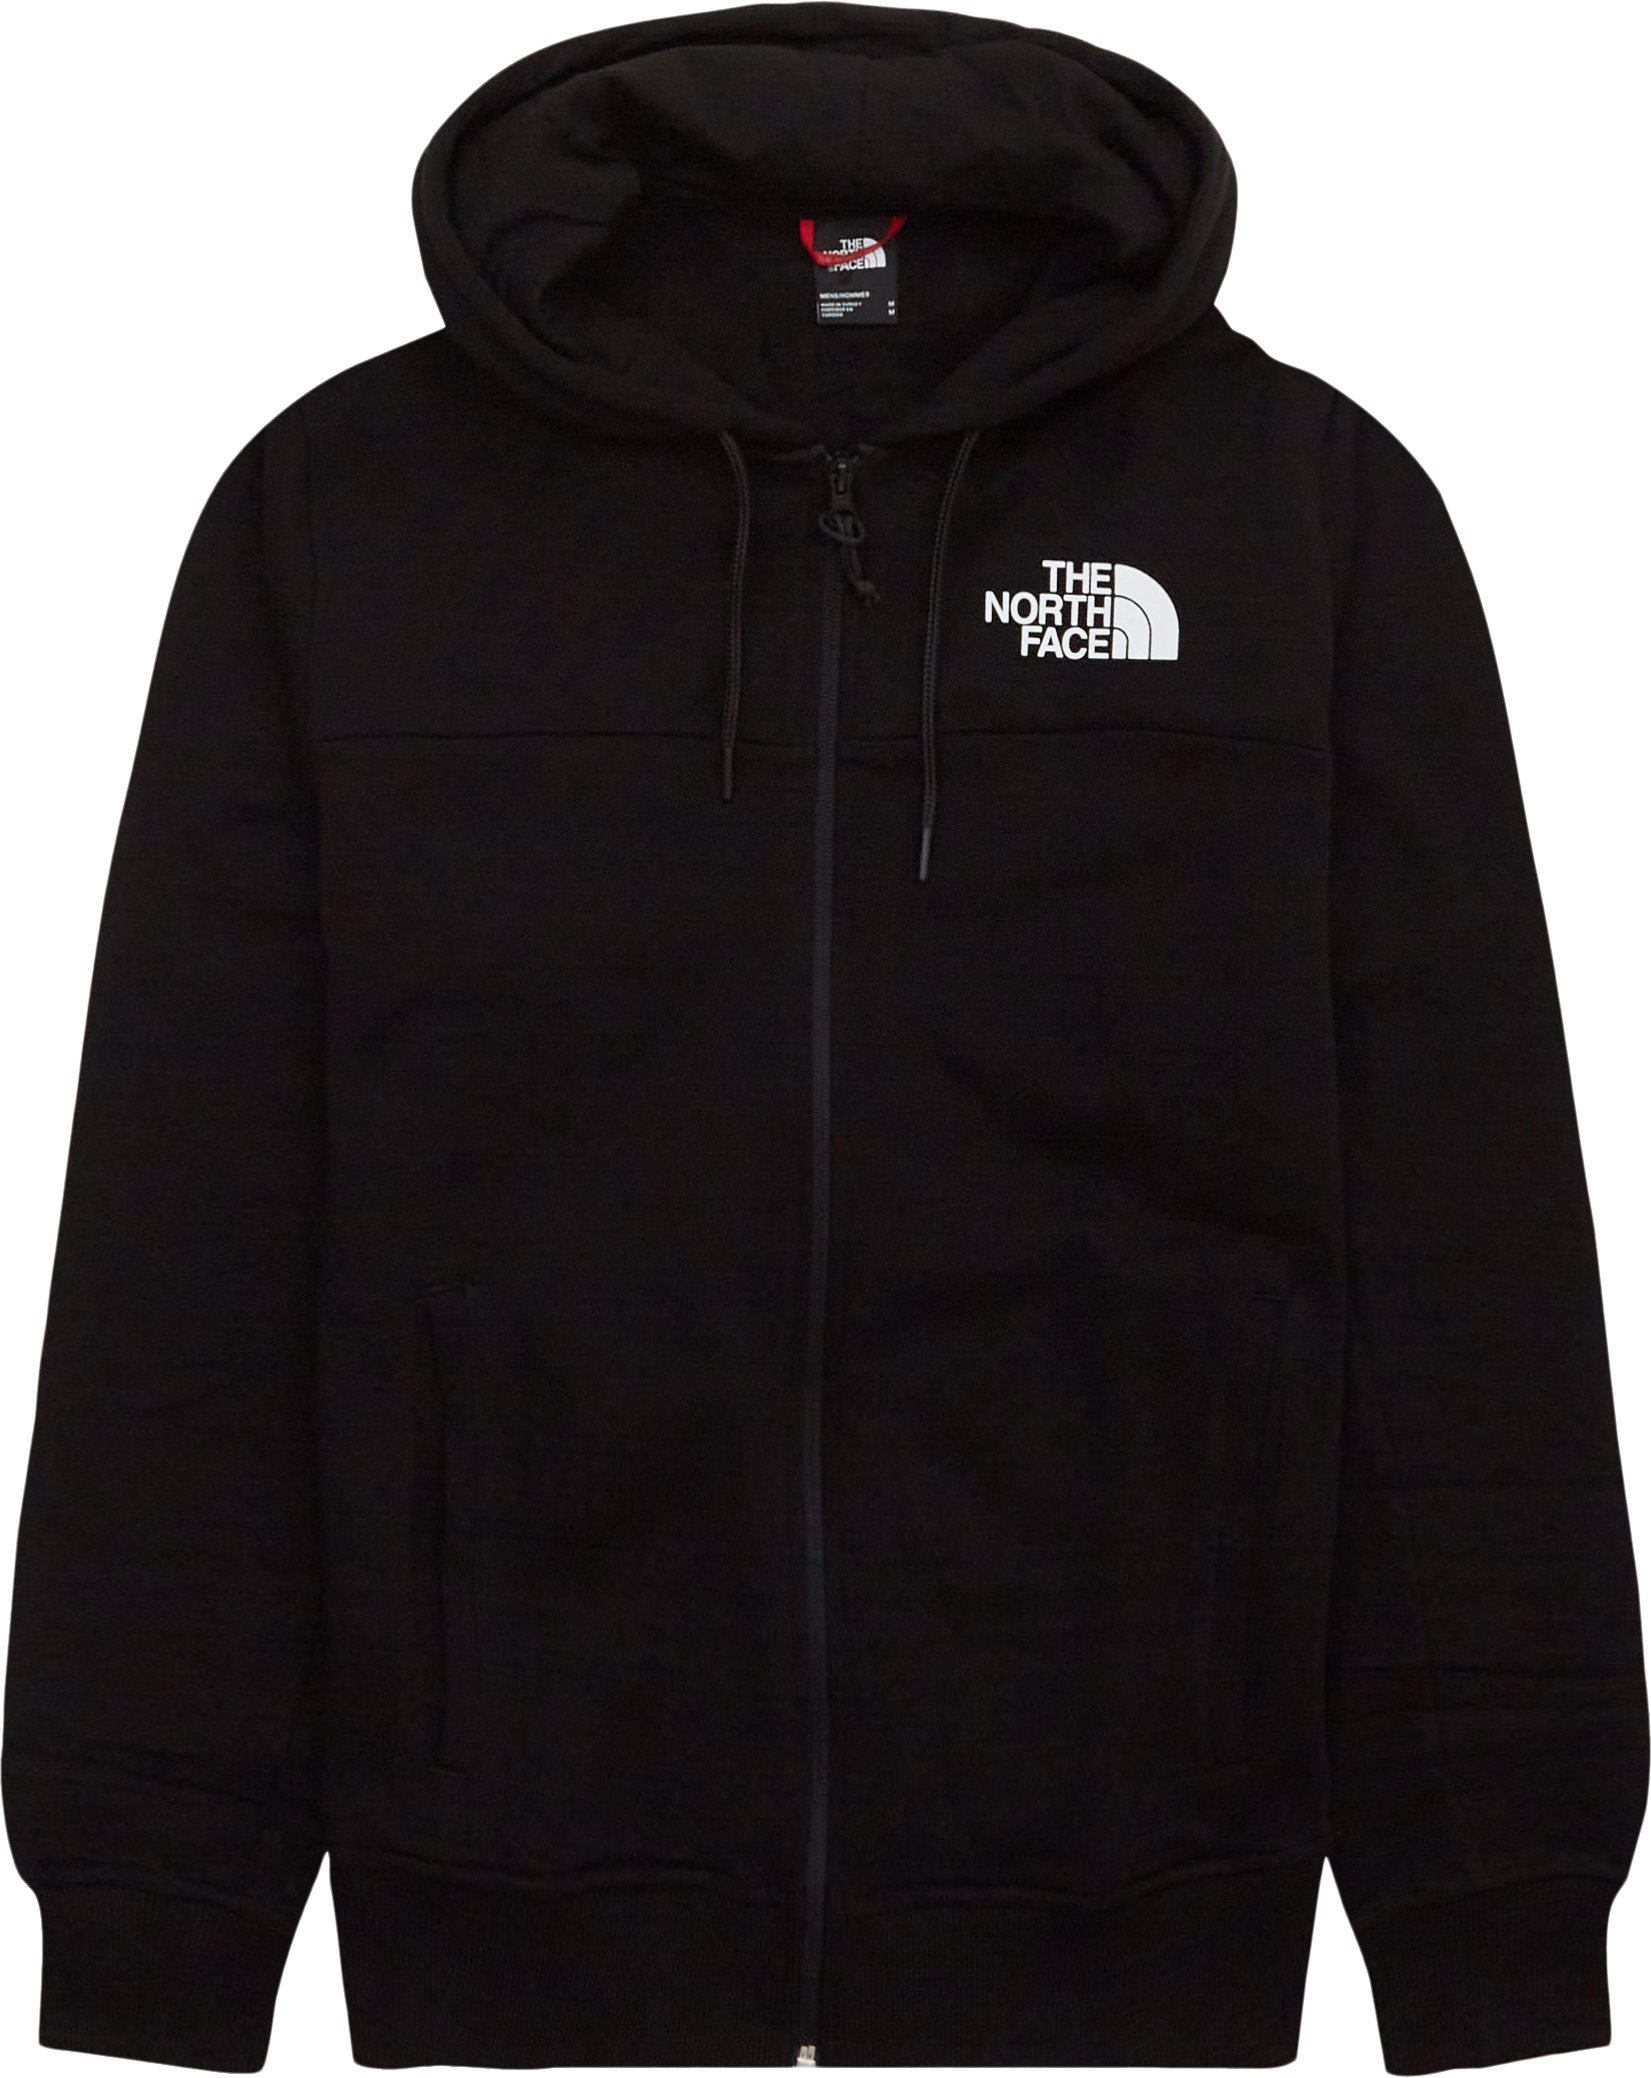 The North Face Sweatshirts ICON FULL ZIP NF0A7X1YJK31 Black